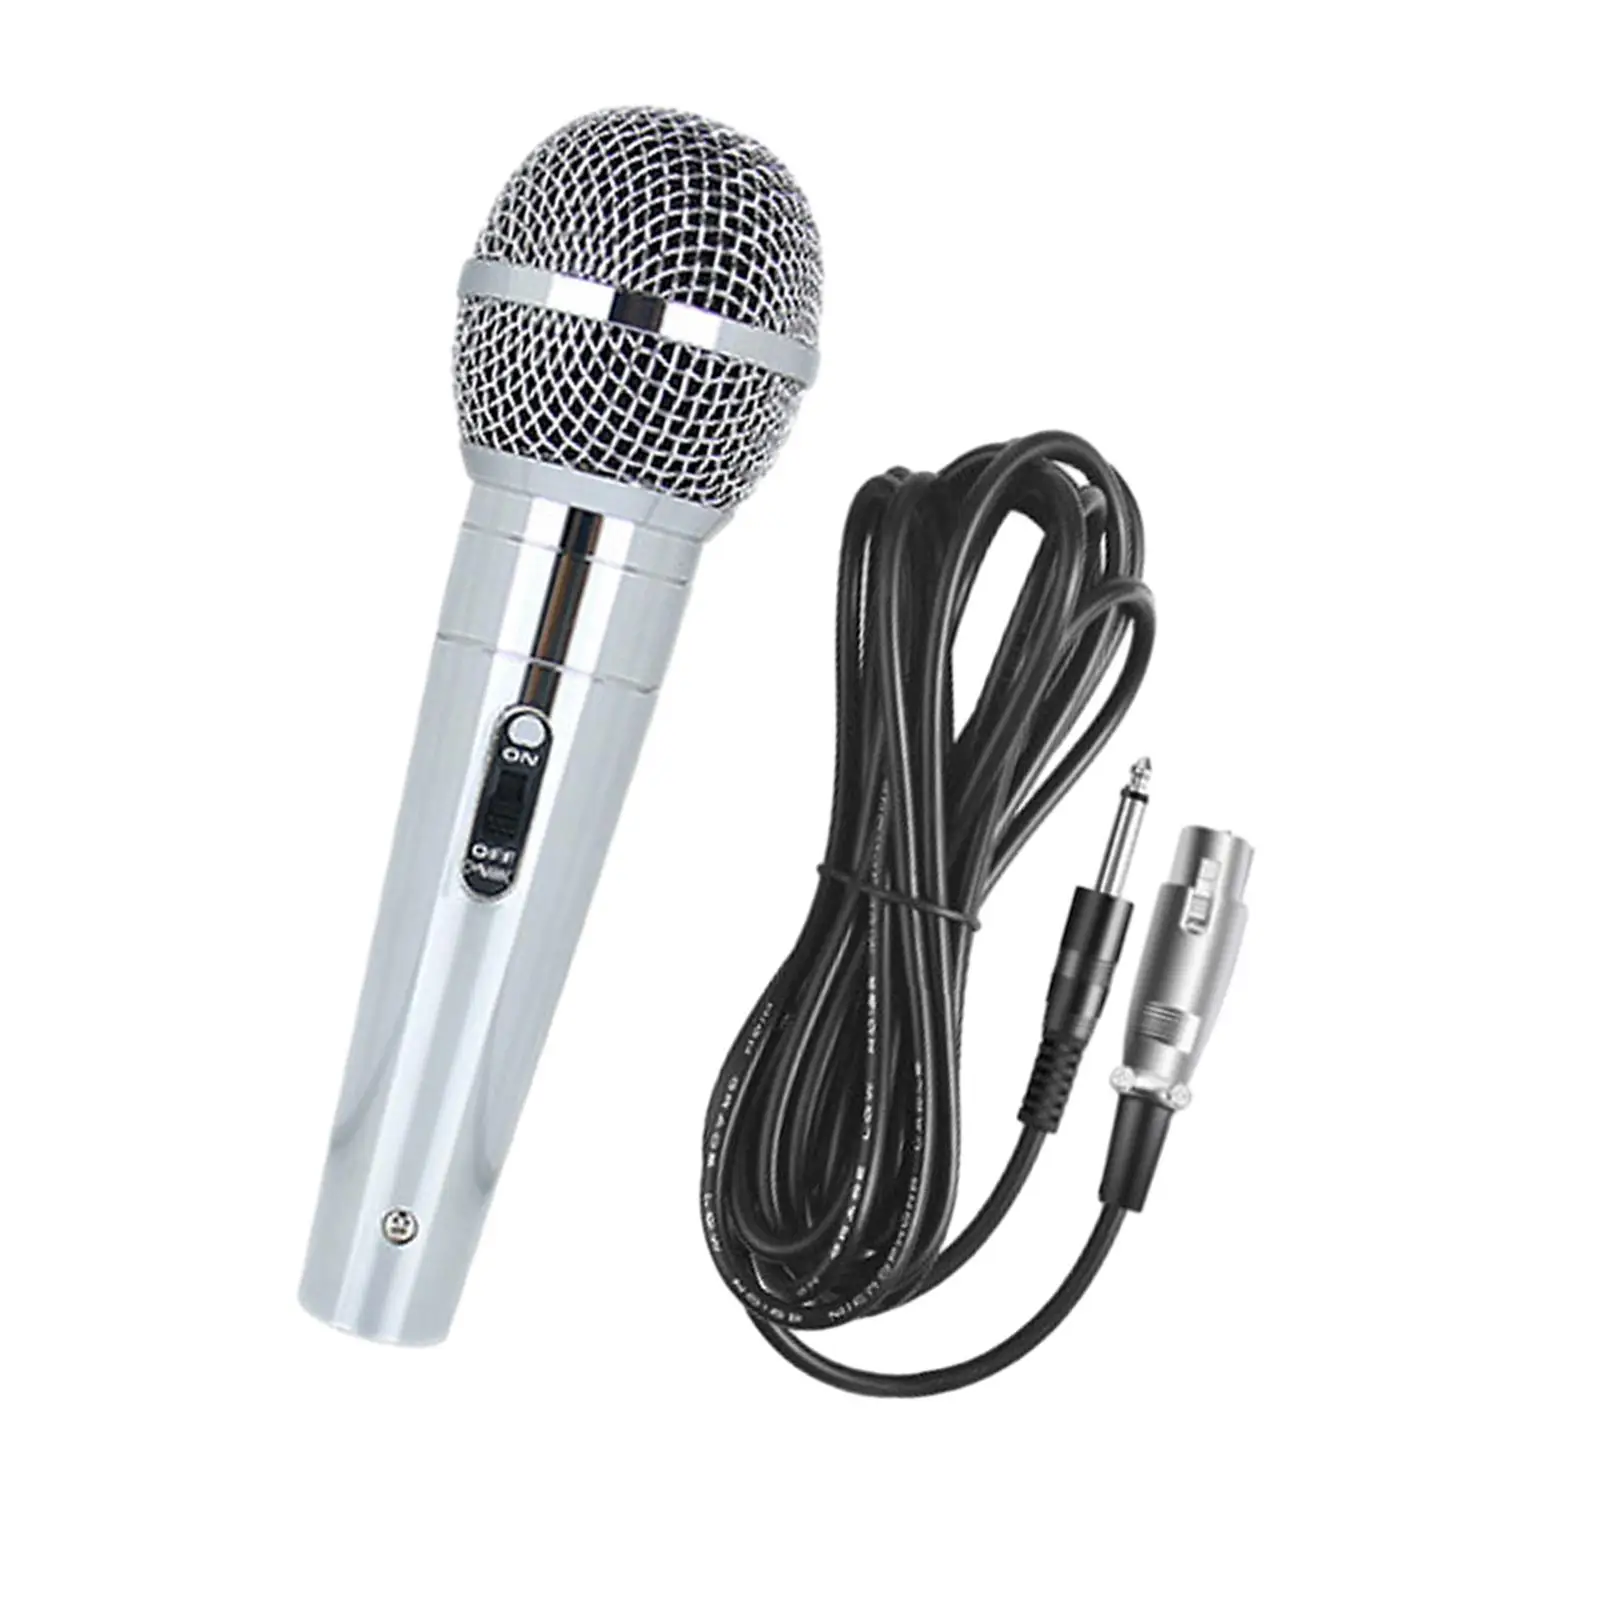 Karaoke Microphone High Performance with 3M Cable Wired Handheld Mic Handheld Microphone for Performance Stage Speaker Party DJ